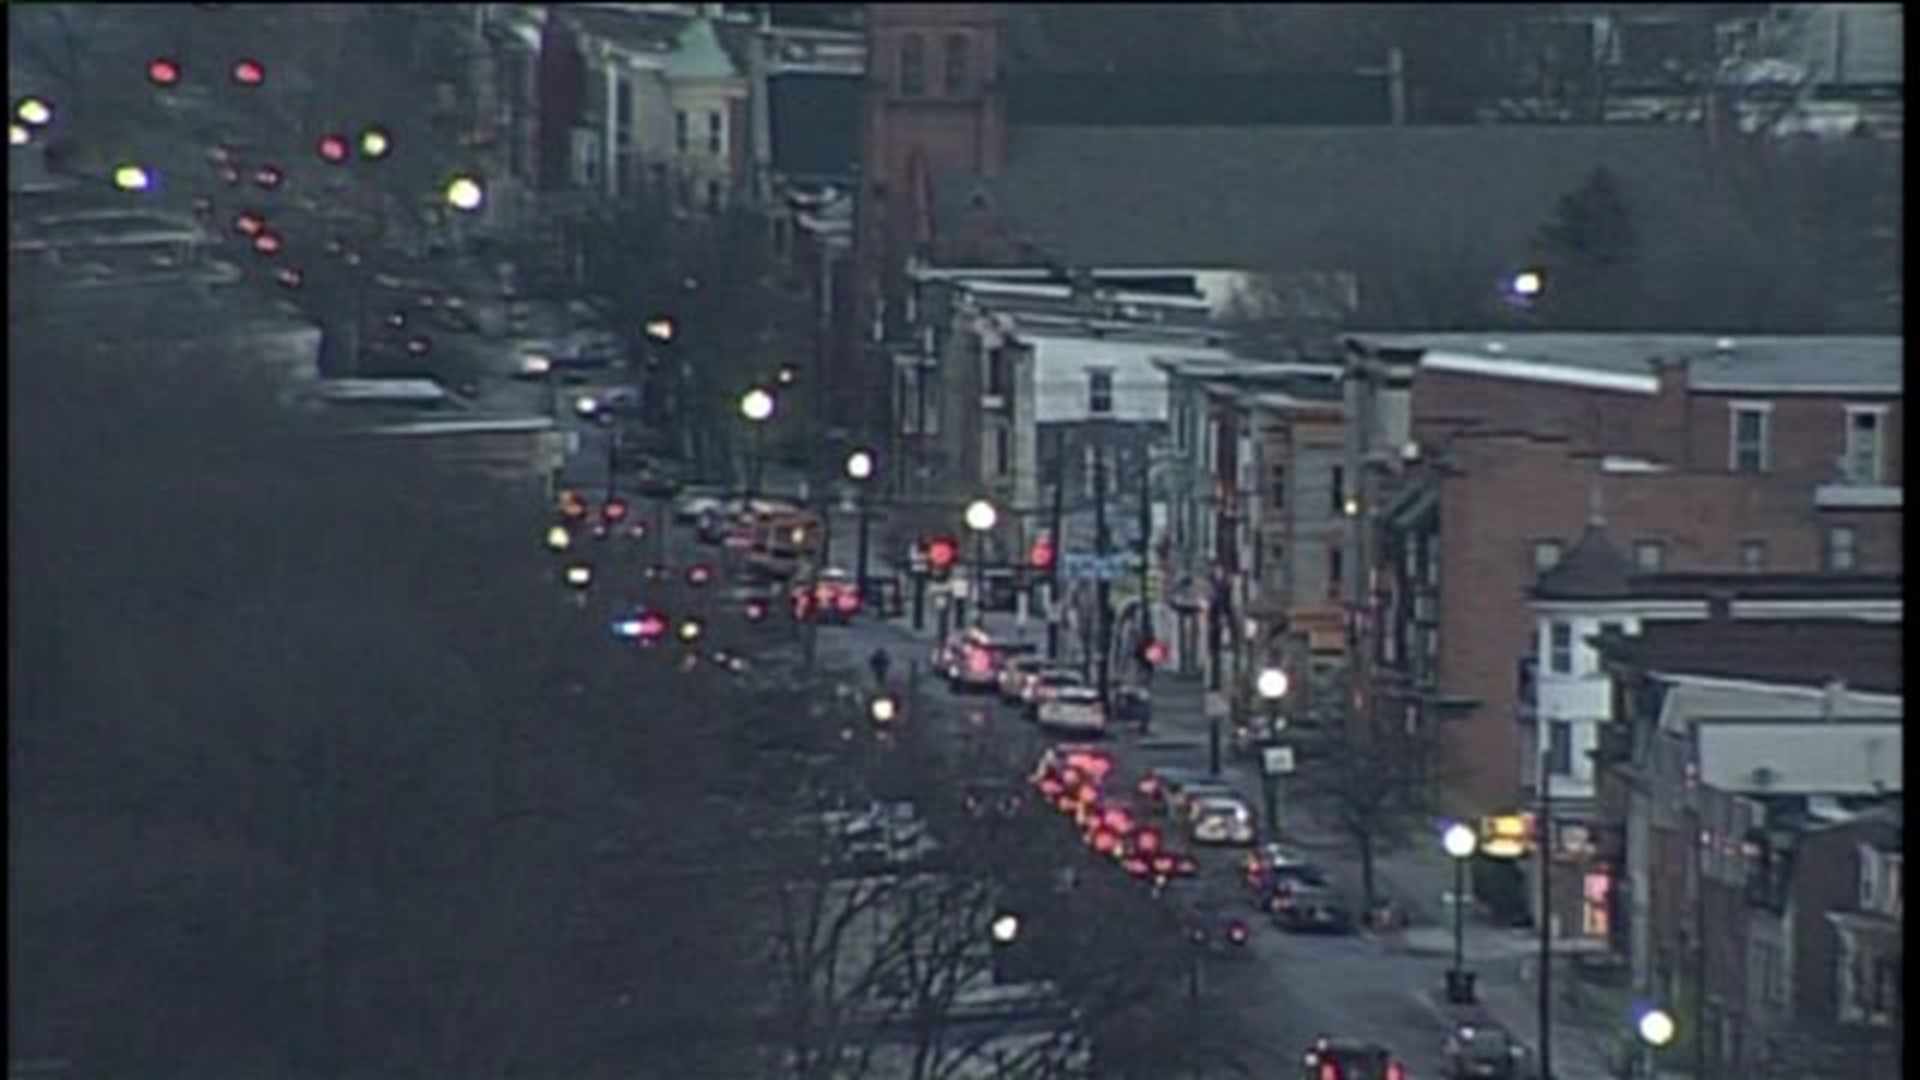 Market and 14th street shooting in Harrisburg